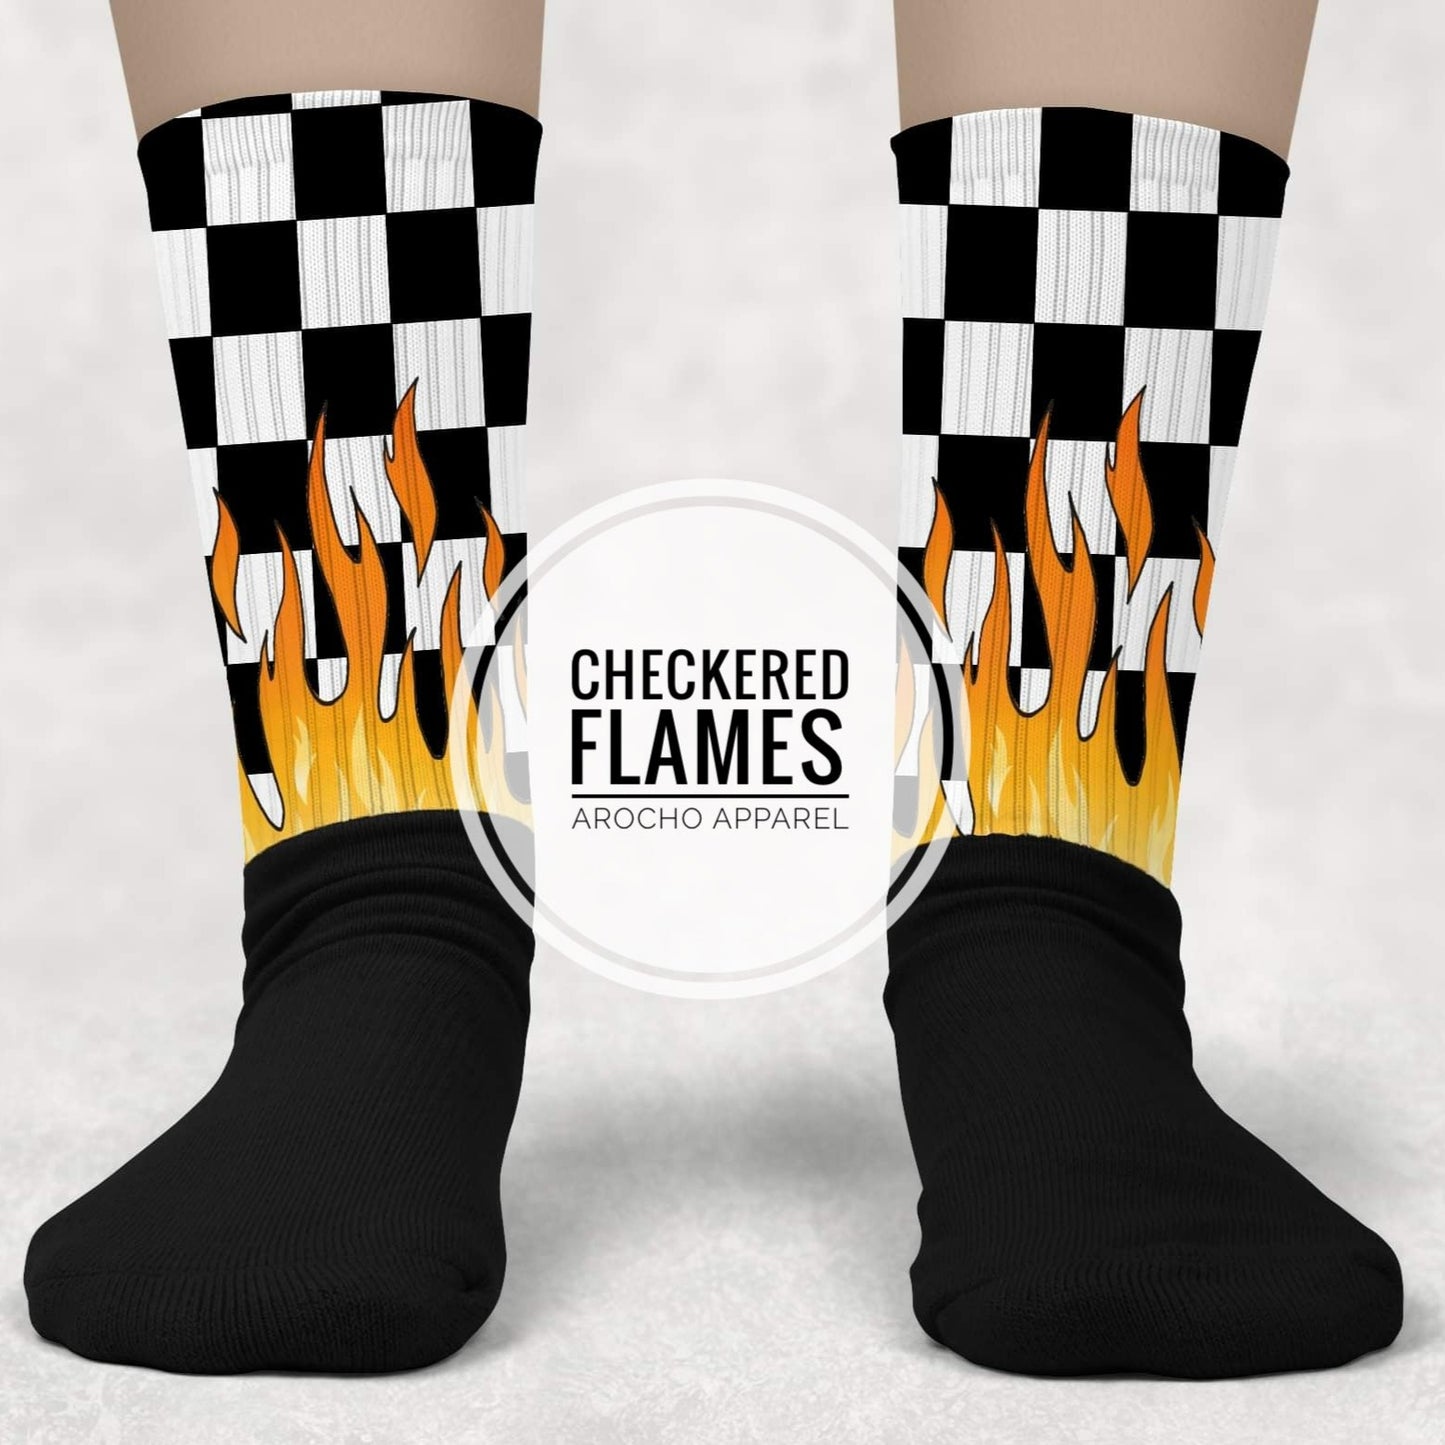 Checkered flames athletic socks